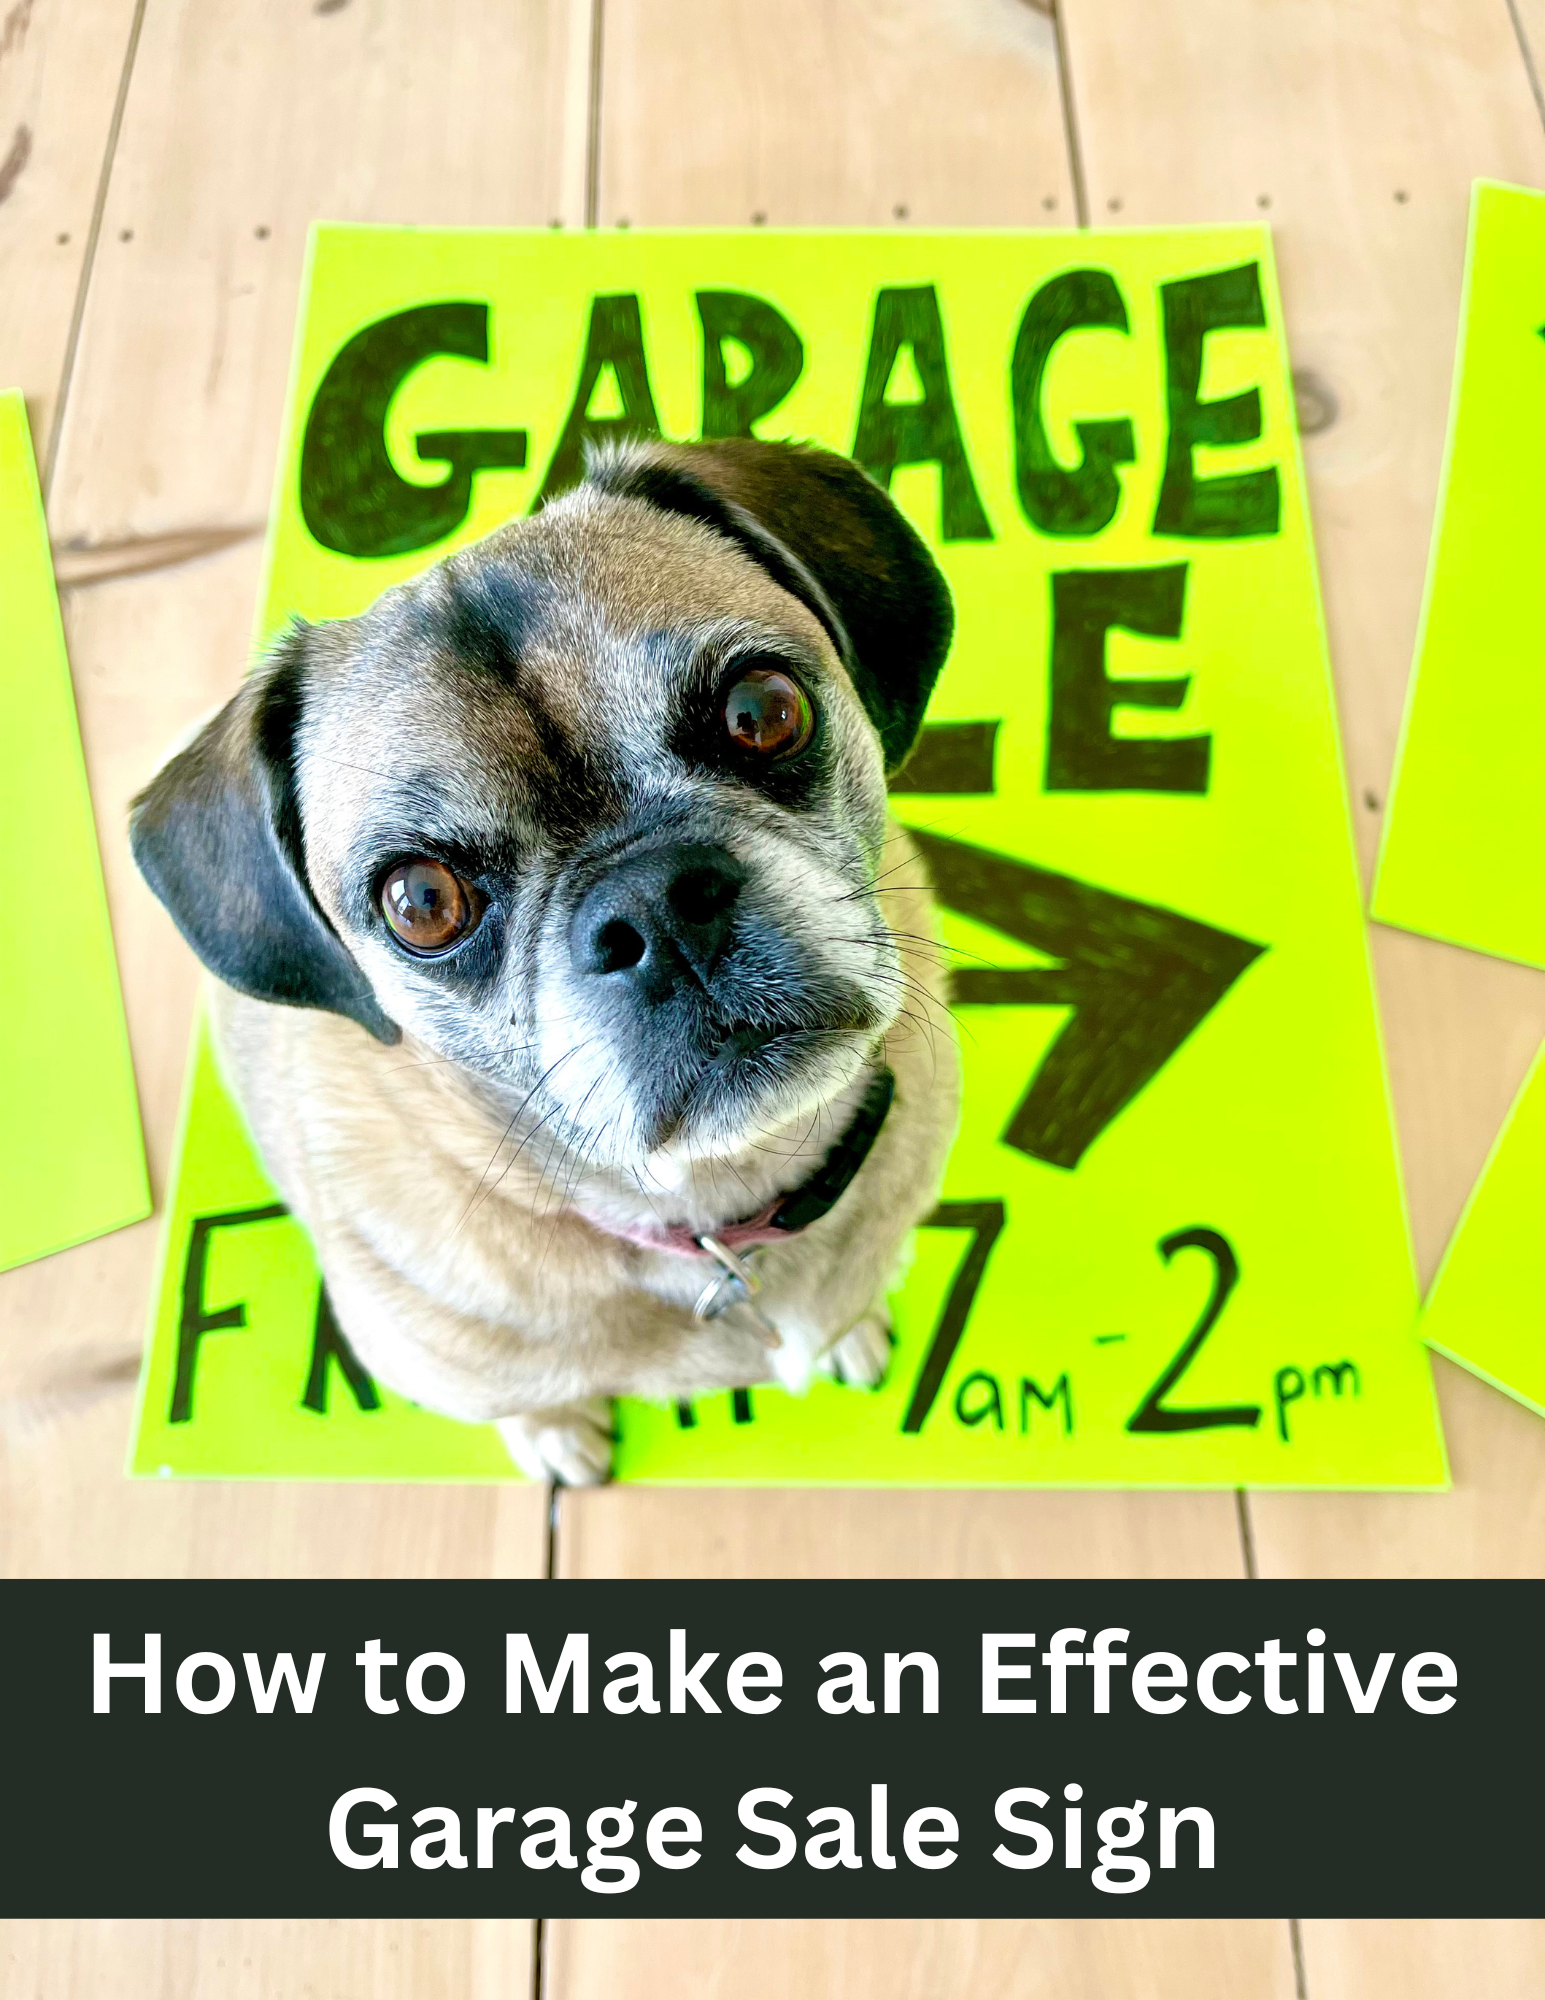 How to Make an Effective Garage Sale Sign